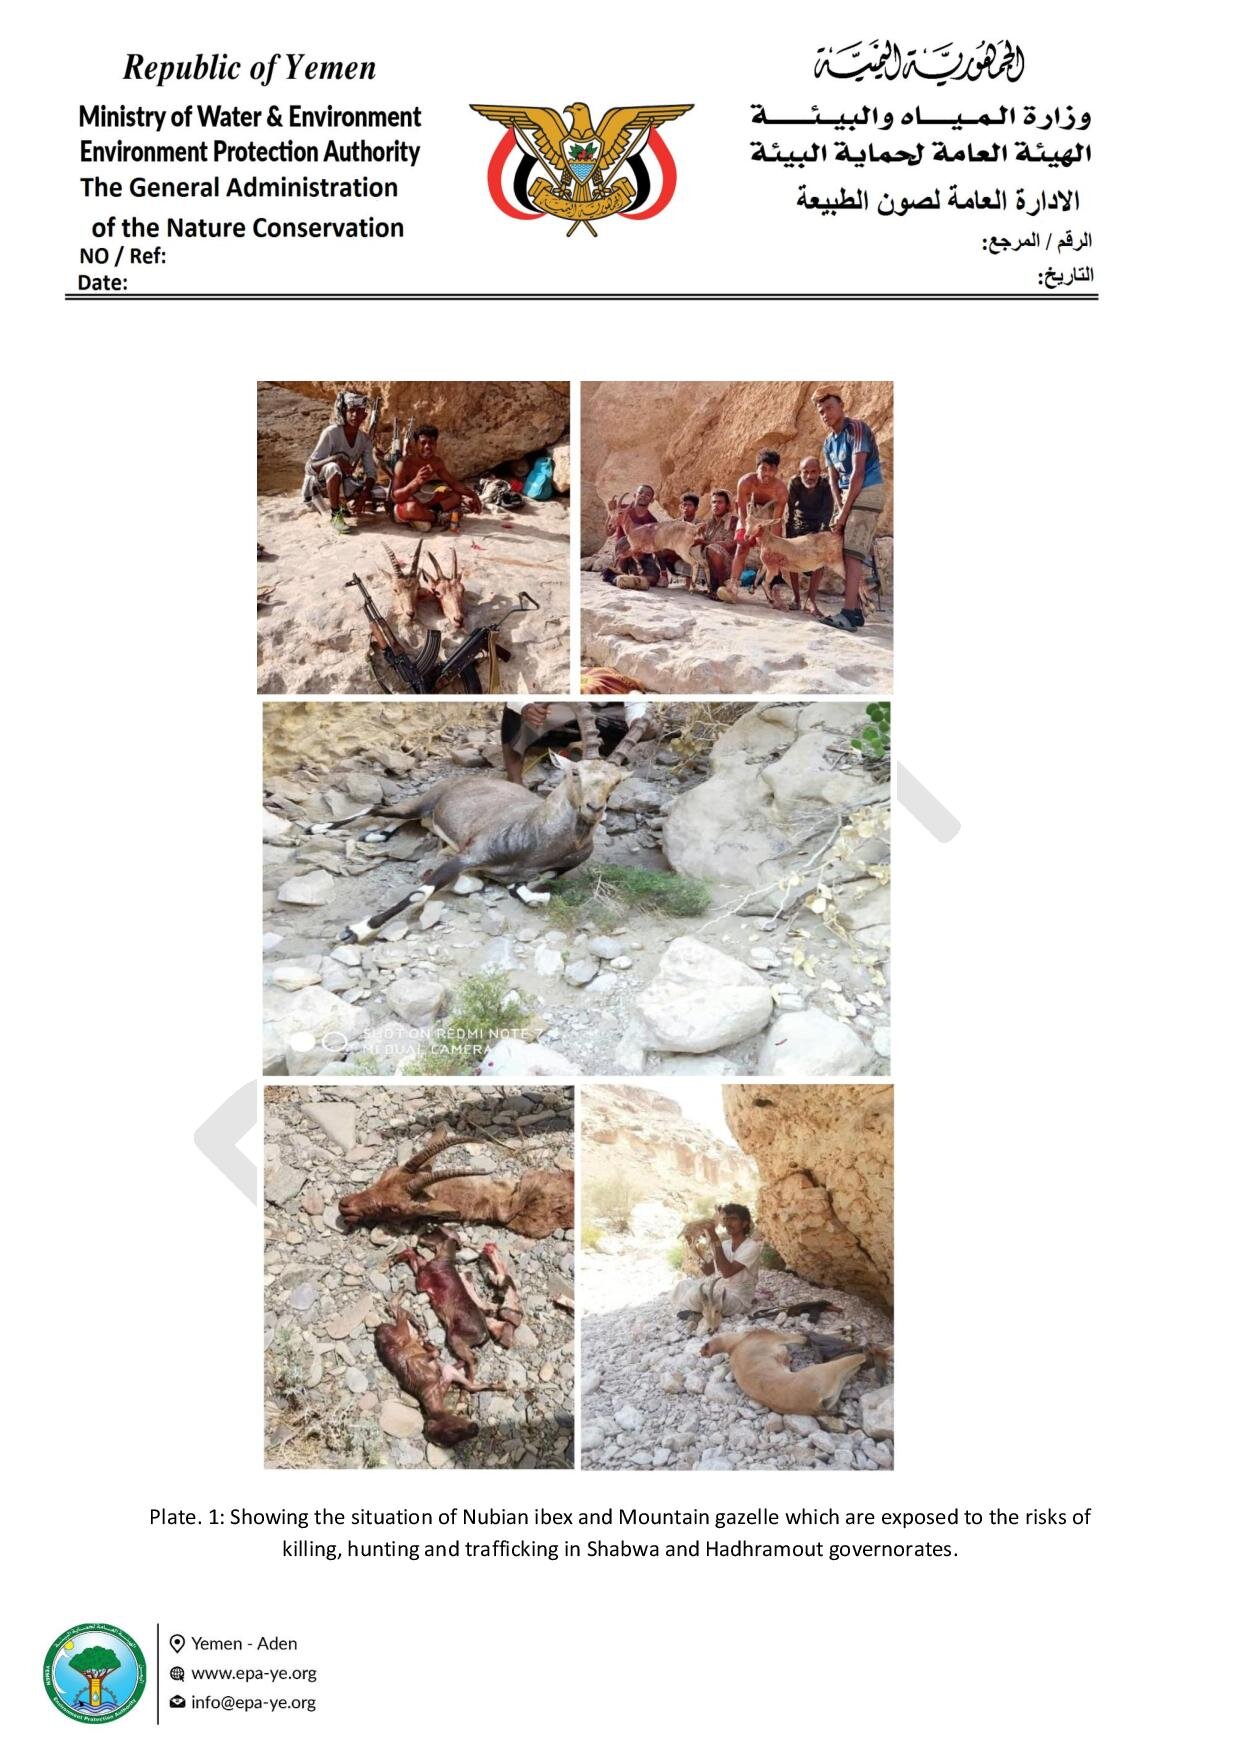 A-project-to-establish-two-natural-protected-areas-in-Shabwa-and-Hadhramout-governorates-to-protect-the-endangered-Nubian-ibex-and-Mountain-gazelle (1)-page-004.jpg